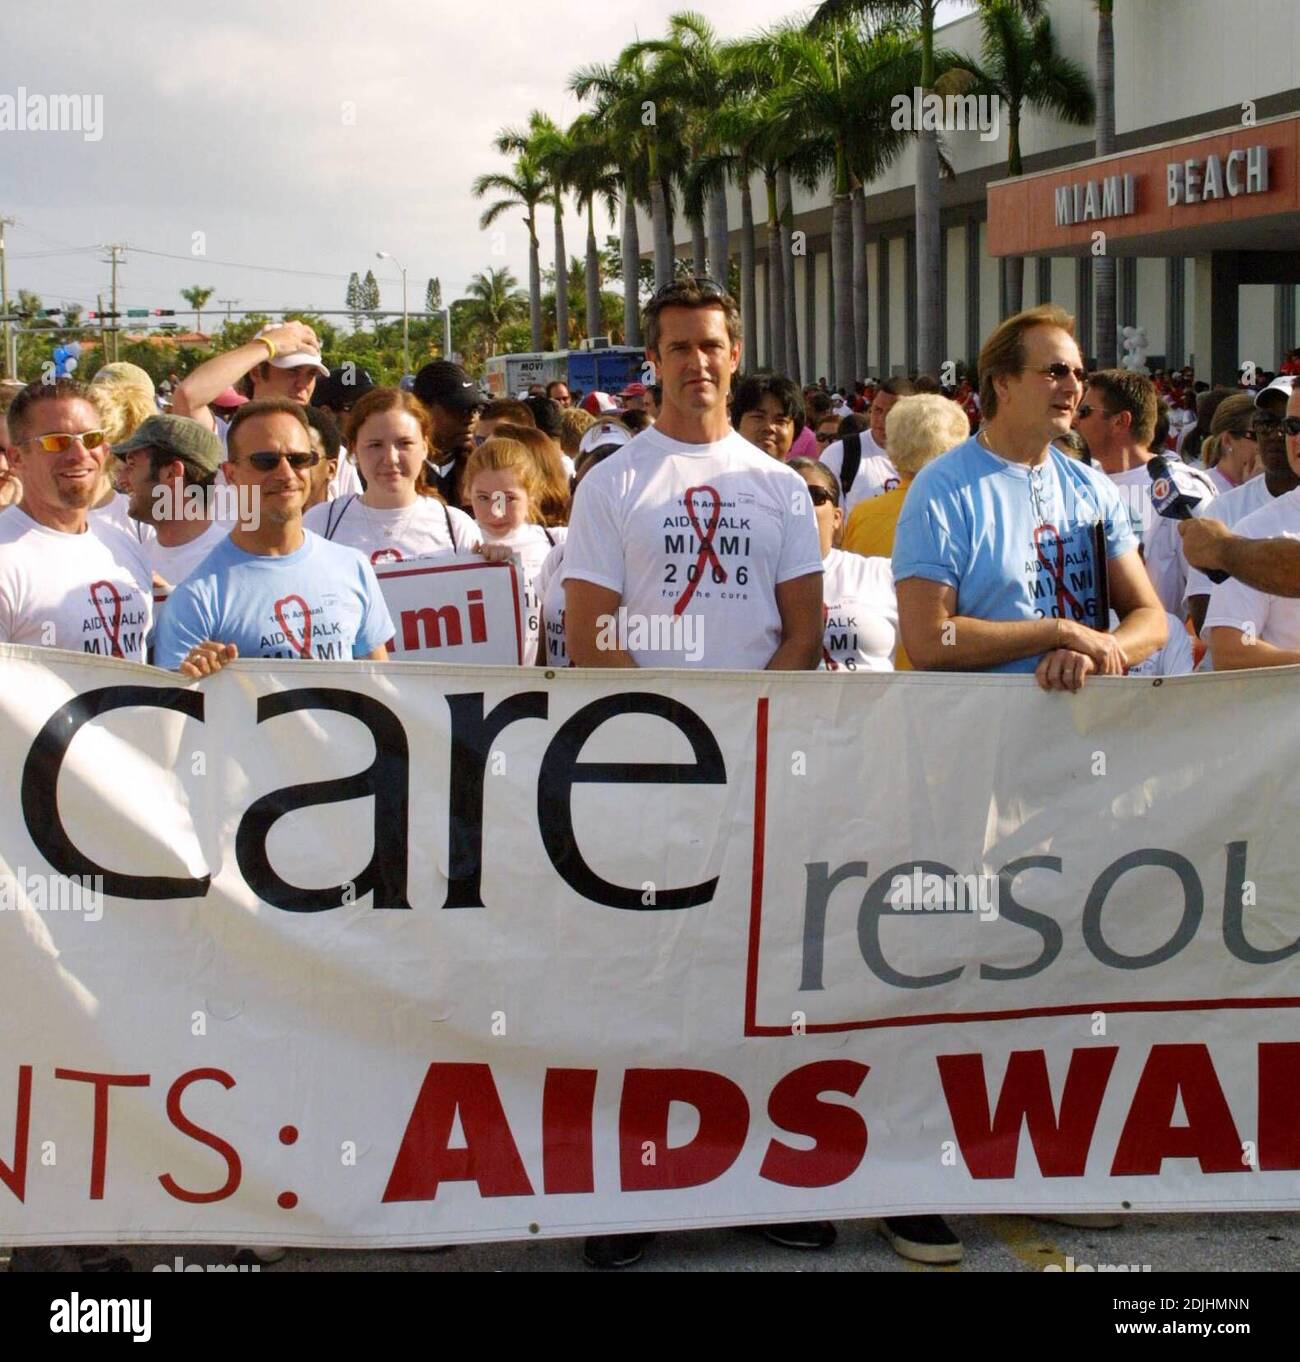 Rupert Everett is Grand Marshall for AIDS Walk Miami 2006. The parade marched 3.1 miles through South Beach and passed famous landmarks such as the Lincoln Theater, The Convention Center and infamous Gay Bar 'Score'. Rupert also was awarded the key to the city and got a kiss from Mr Miami beach Michael Aller, 4/23/06 Stock Photo